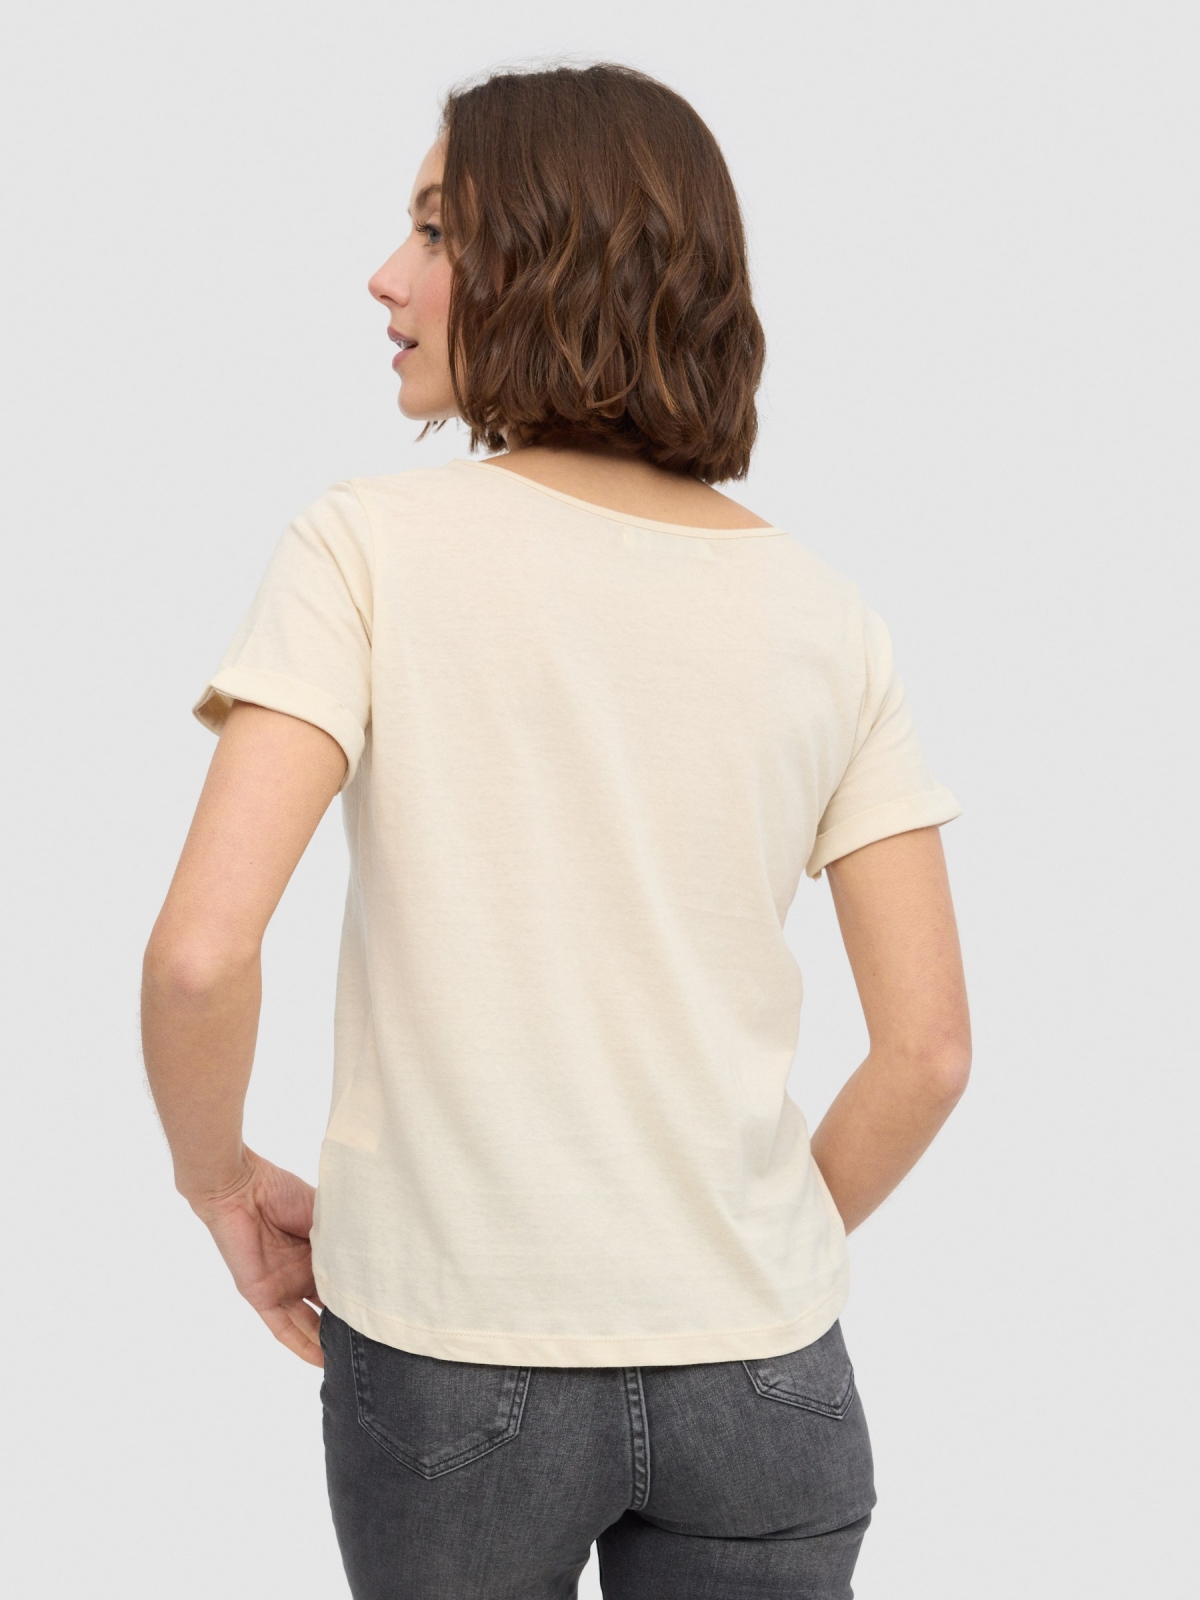 Sun printed t-shirt sand middle back view